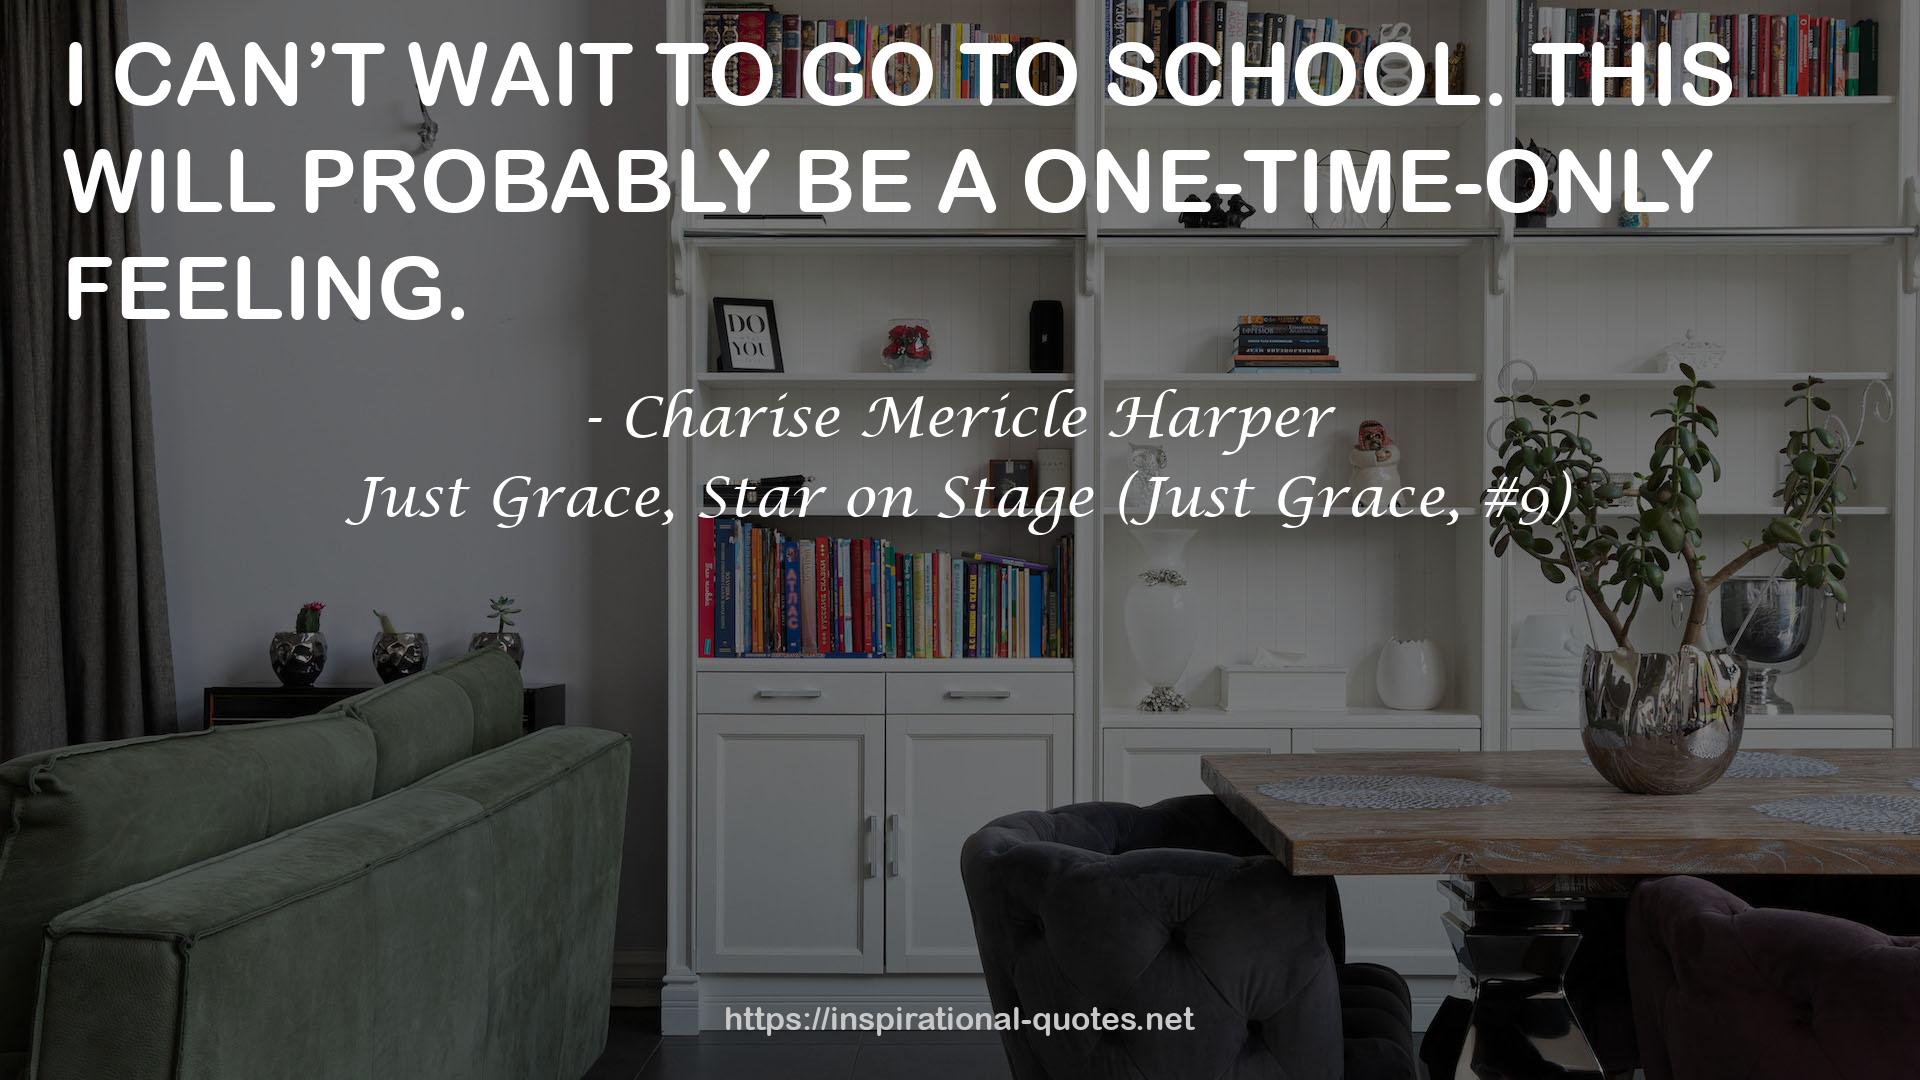 Just Grace, Star on Stage (Just Grace, #9) QUOTES